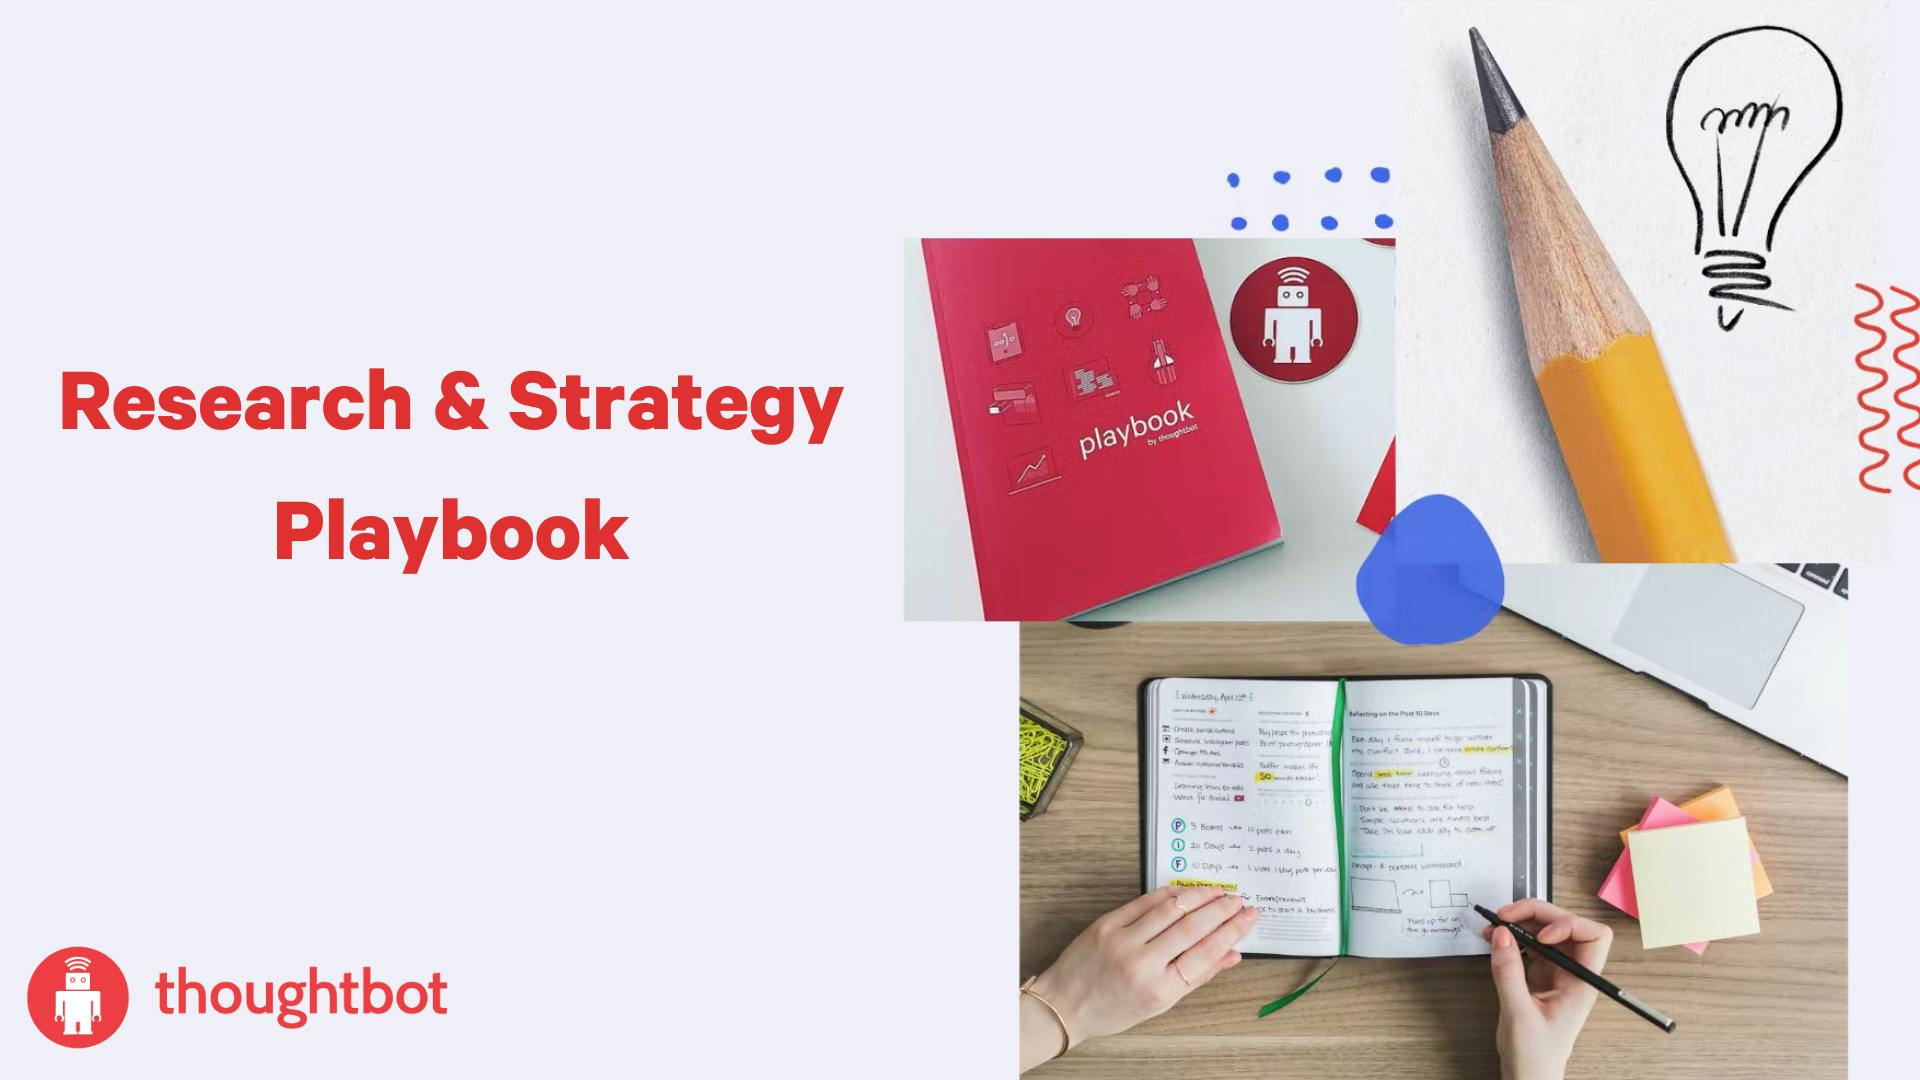 Collage of photos of a playbook, a pencil and drawling of a lightbulb, a person writing in a notebook with the thoughtbot logo and text reading Research & Strategy Playbook